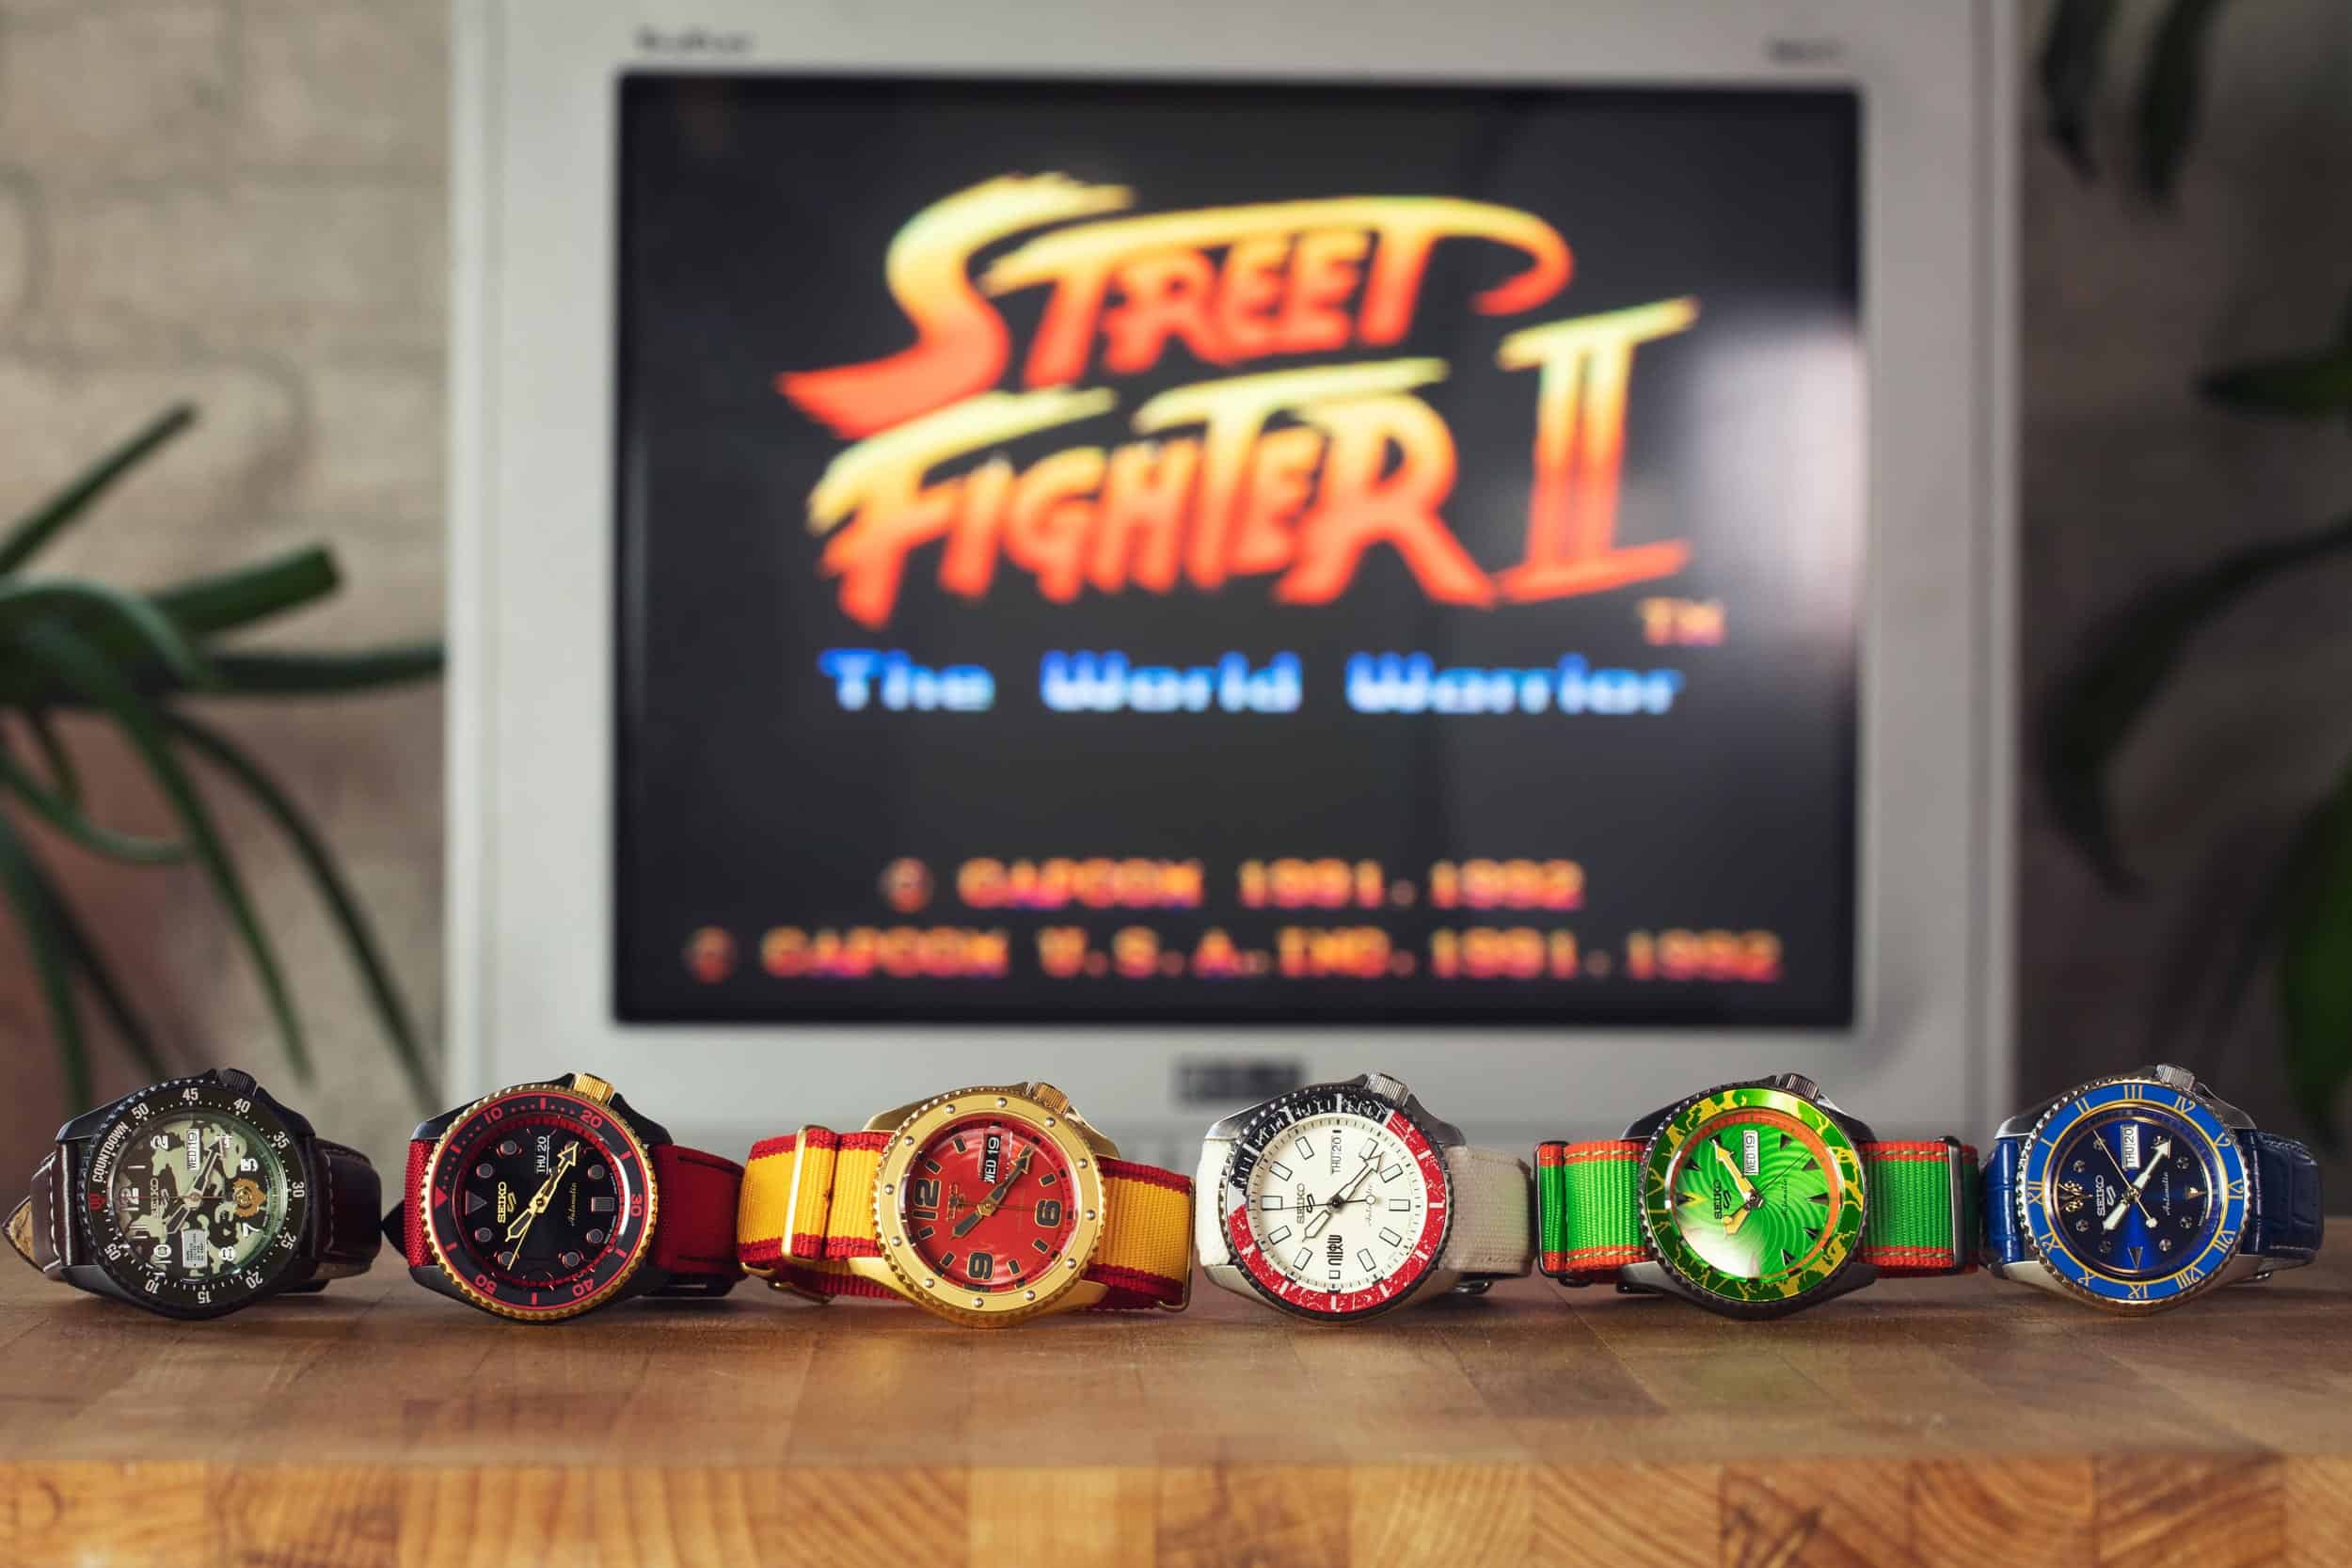 Introducing the Seiko 5 Sports Street Fighter V Limited Editions – Exclusive US Launch at the Windup Watch Shop